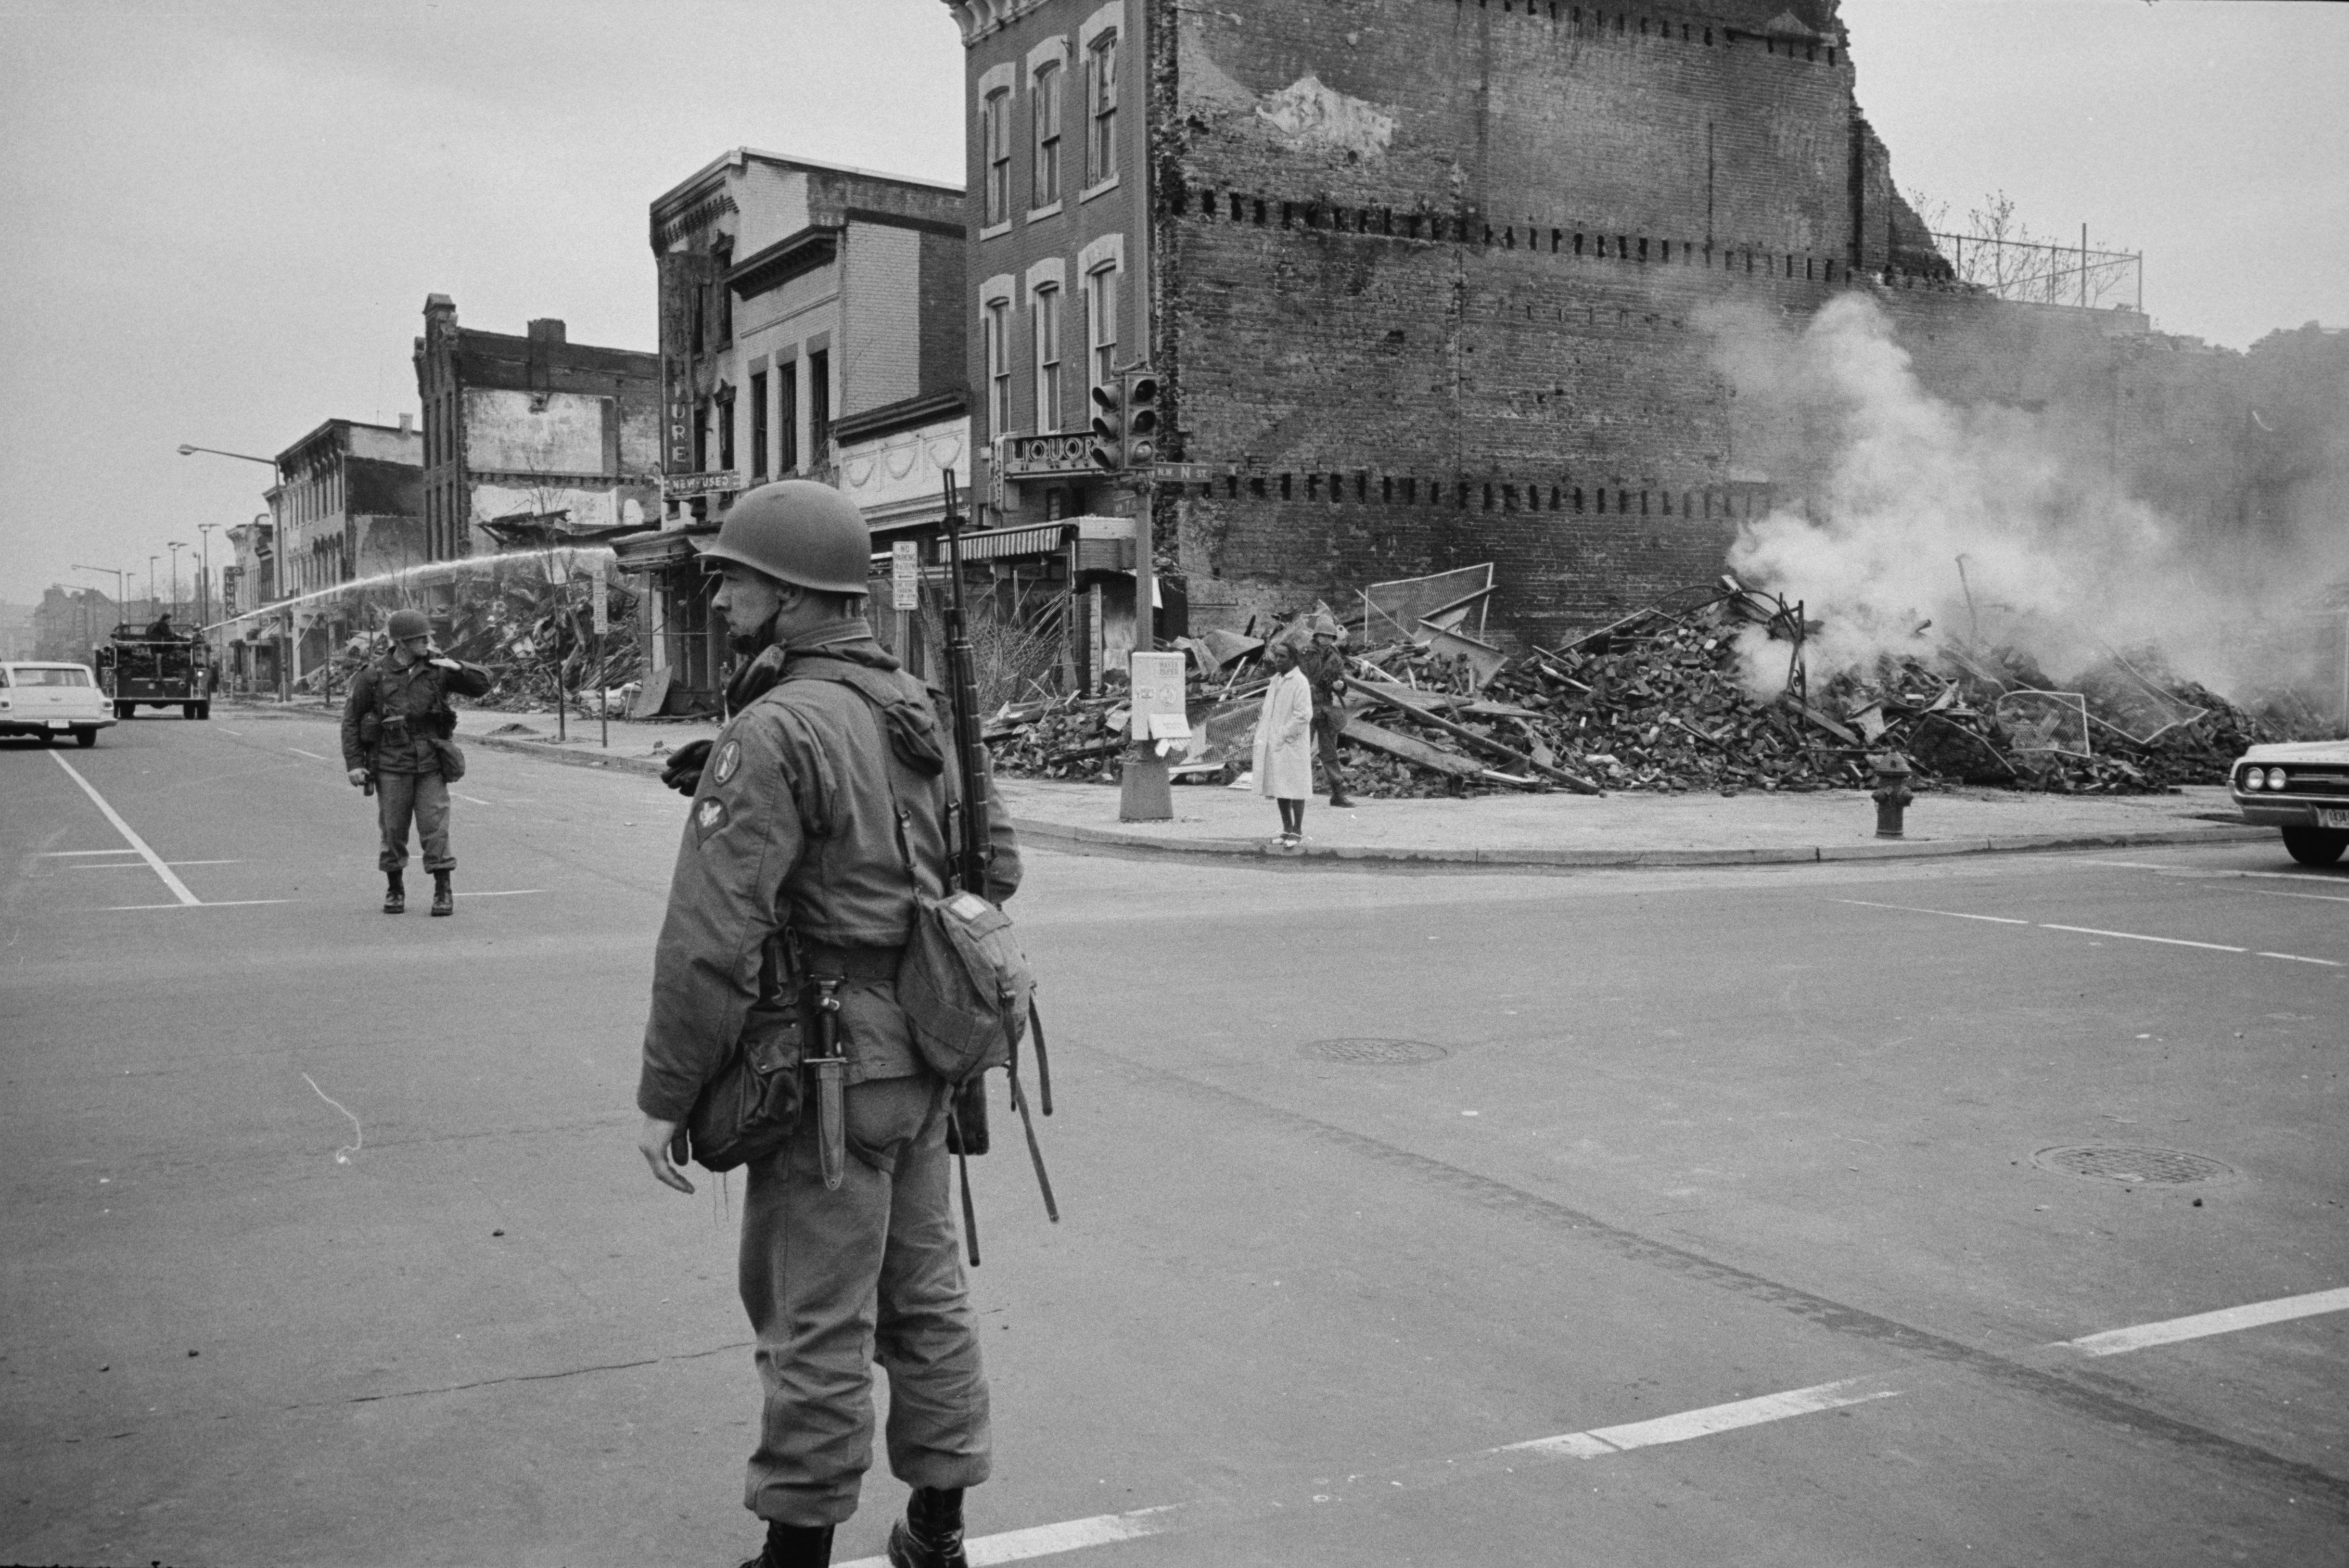 A soldier standing guard with the ruins of buildings that were destroyed during the riots that followed the assassination of Martin Luther King, Jr., in this April 8, 1968 photograph (Library of Congress/Handout via Reuters/Reuters)